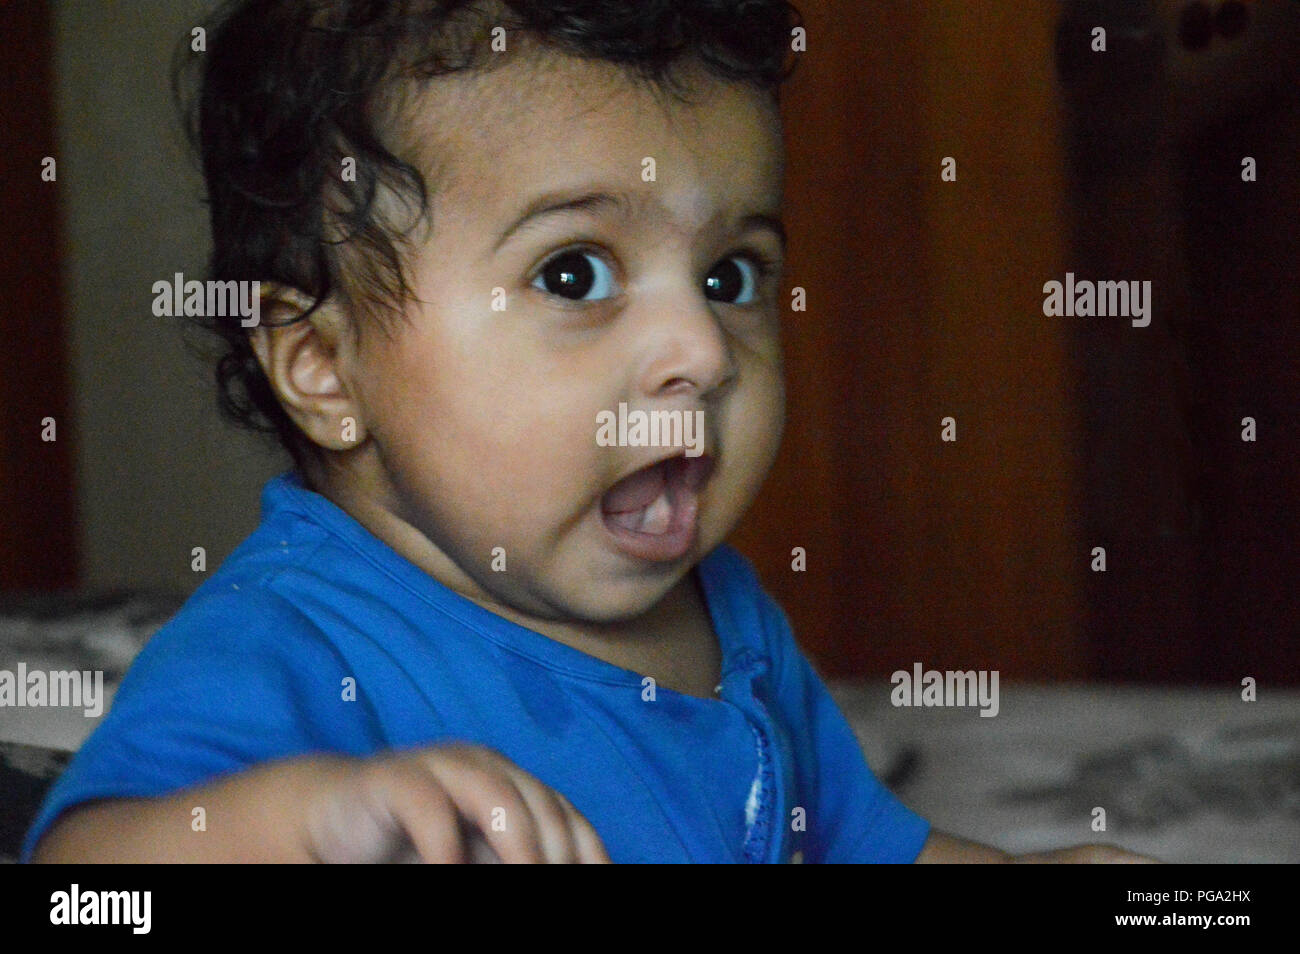 Big eyed infant in Blue shirt singing with her mouth wide open Stock Photo